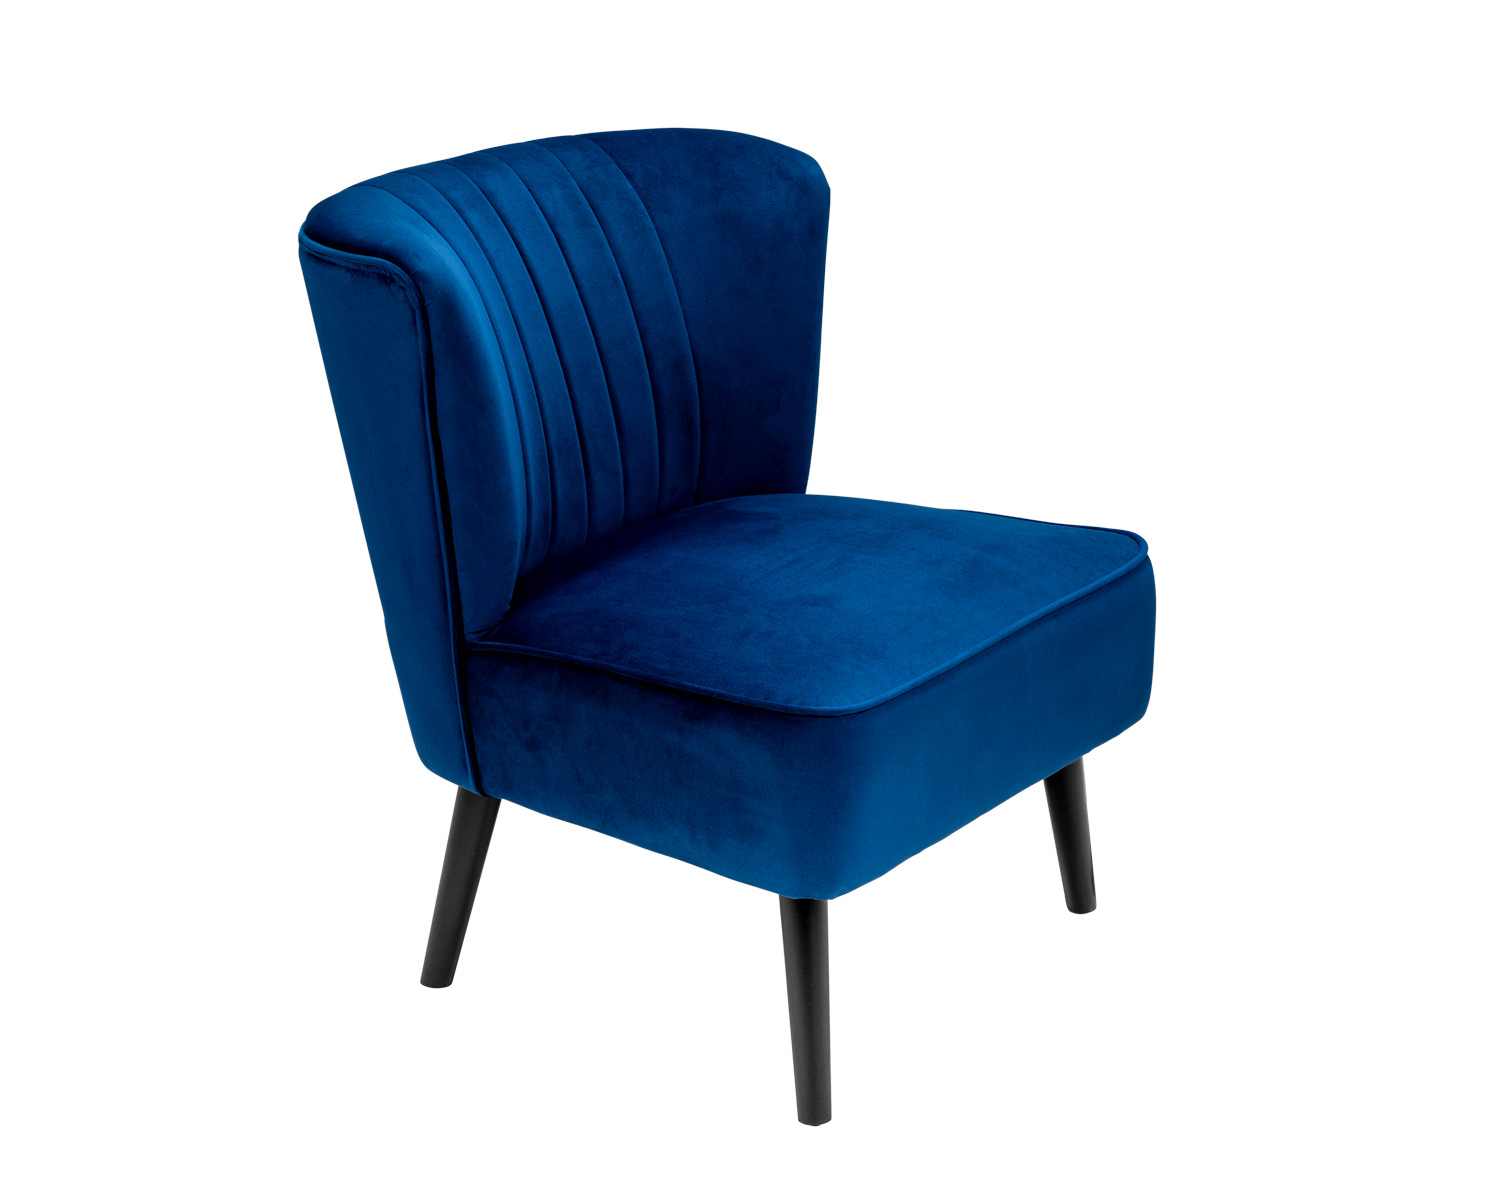 Image of Accent Chair in Royal Blue Velvet with Natural Wood Legs - Lucy Oyster Range